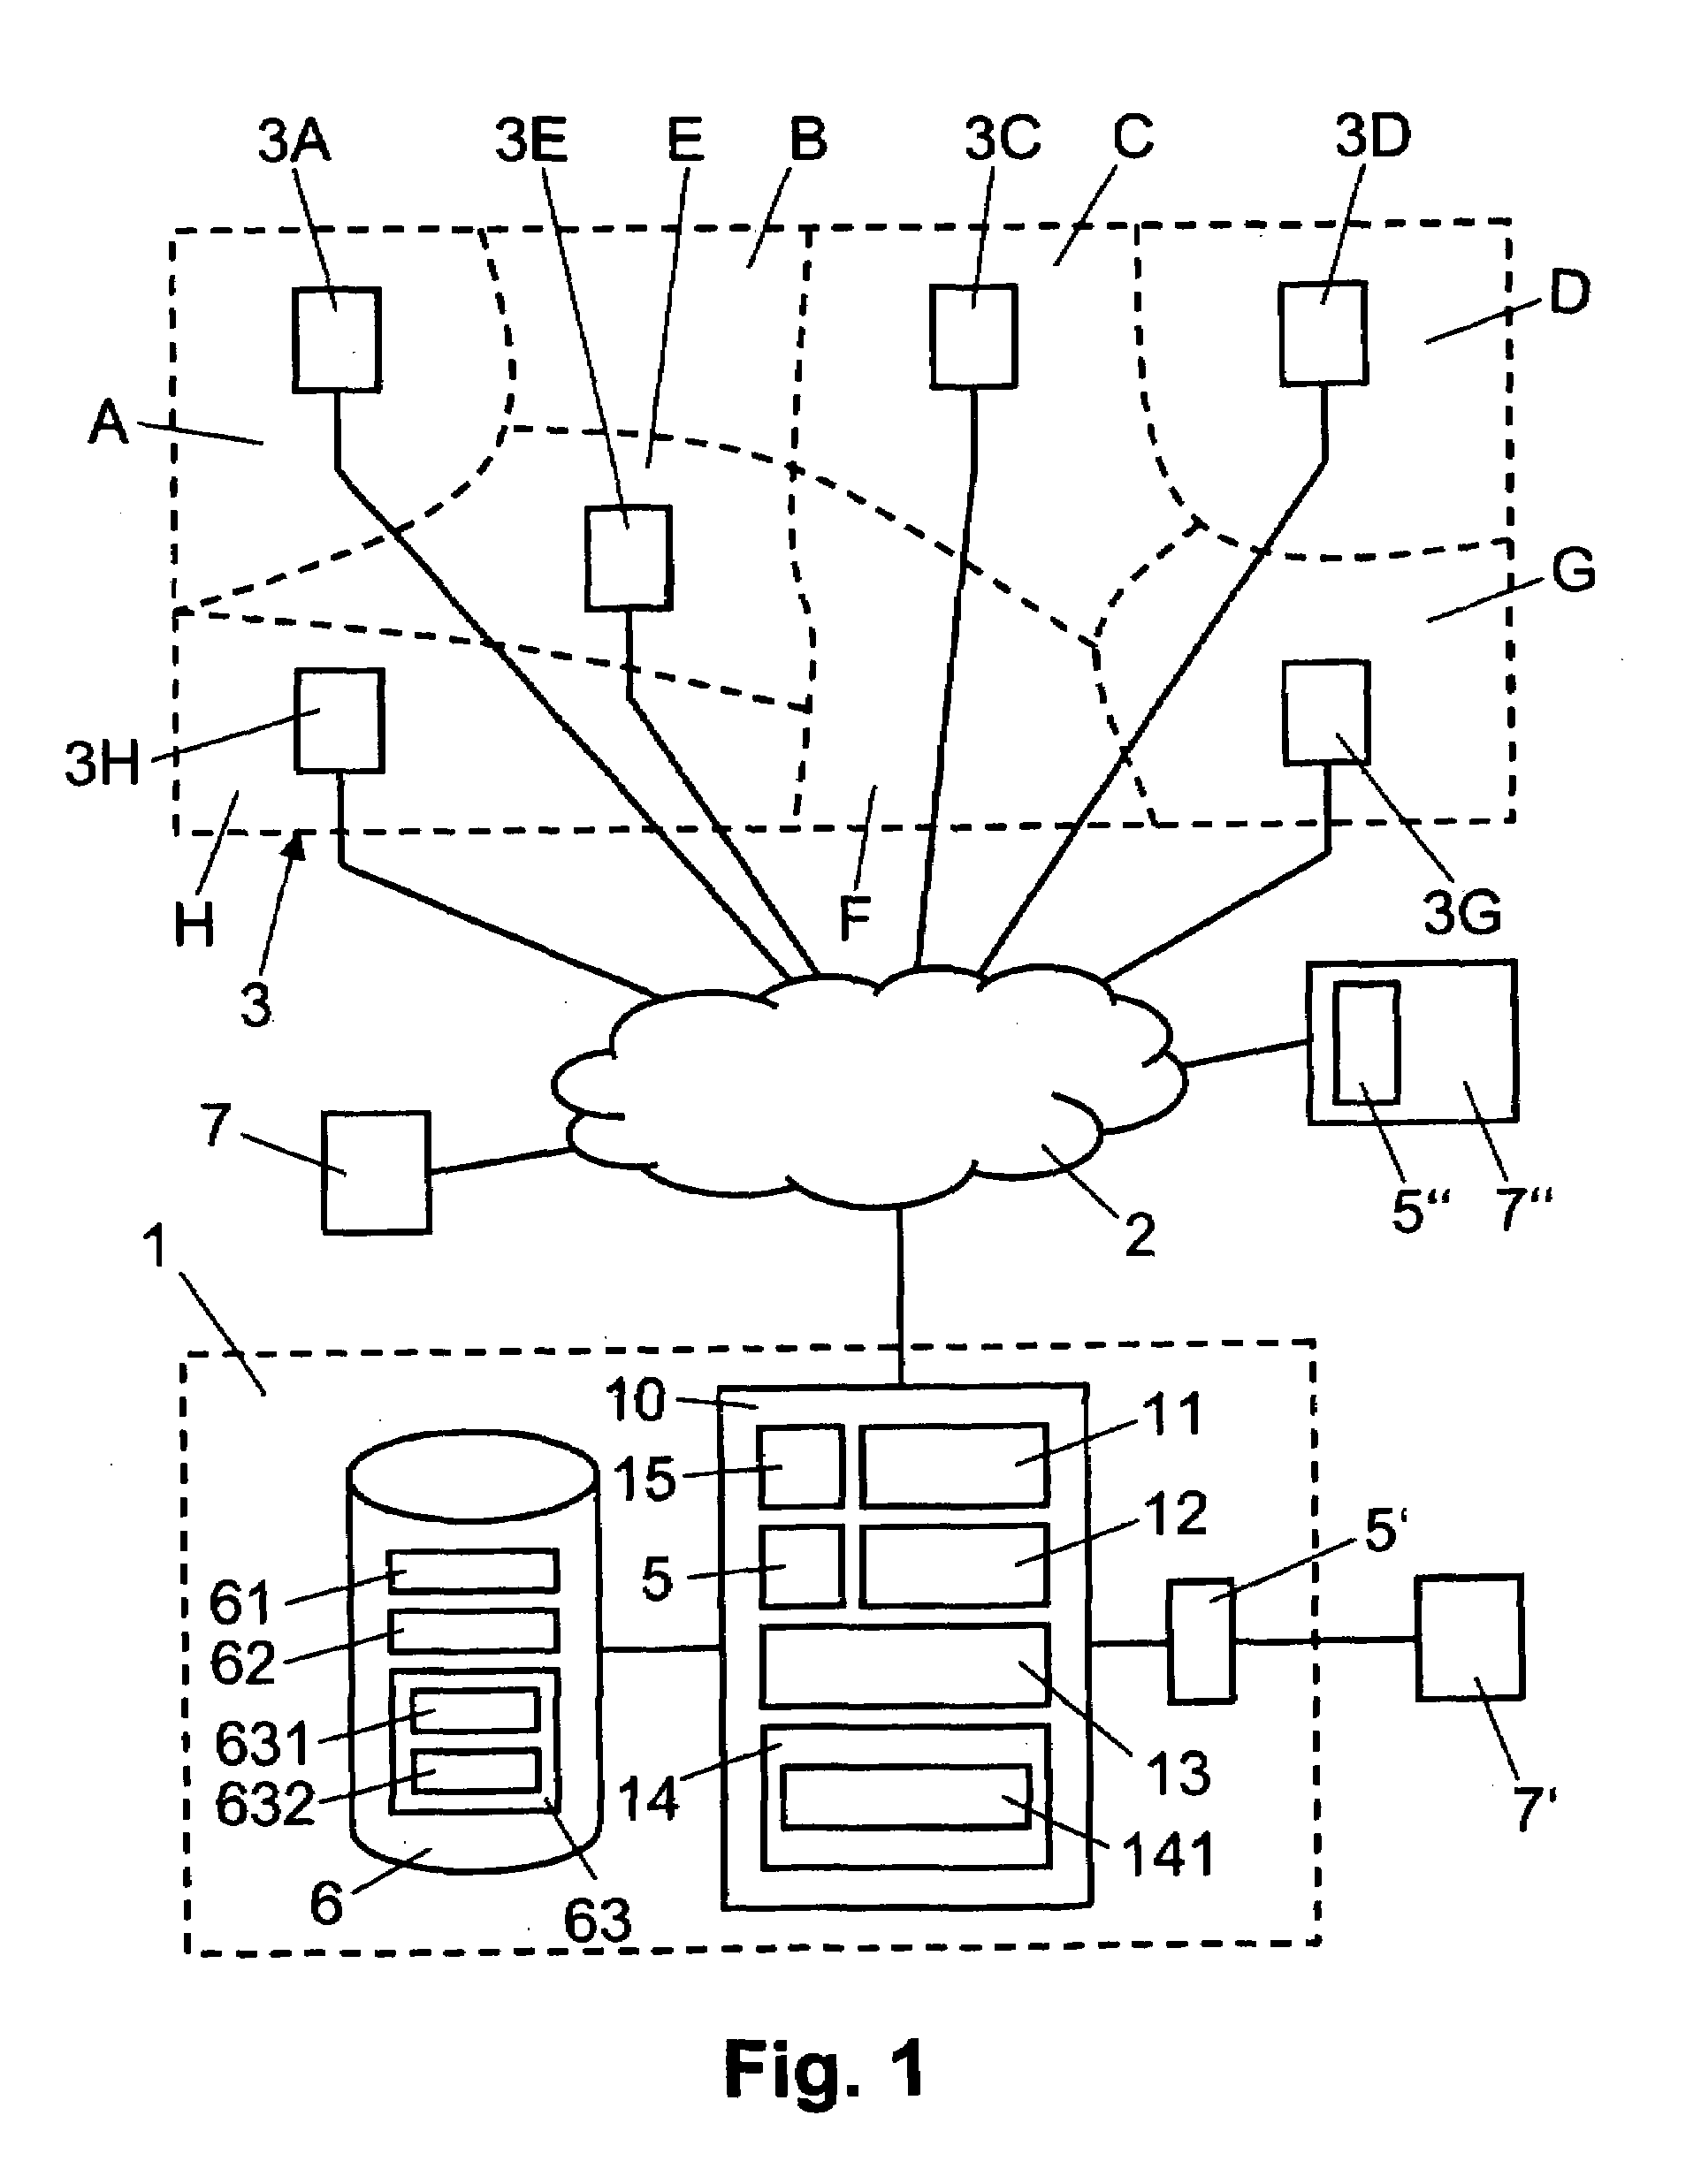 Computer-Based System and Method For Detecting Risks